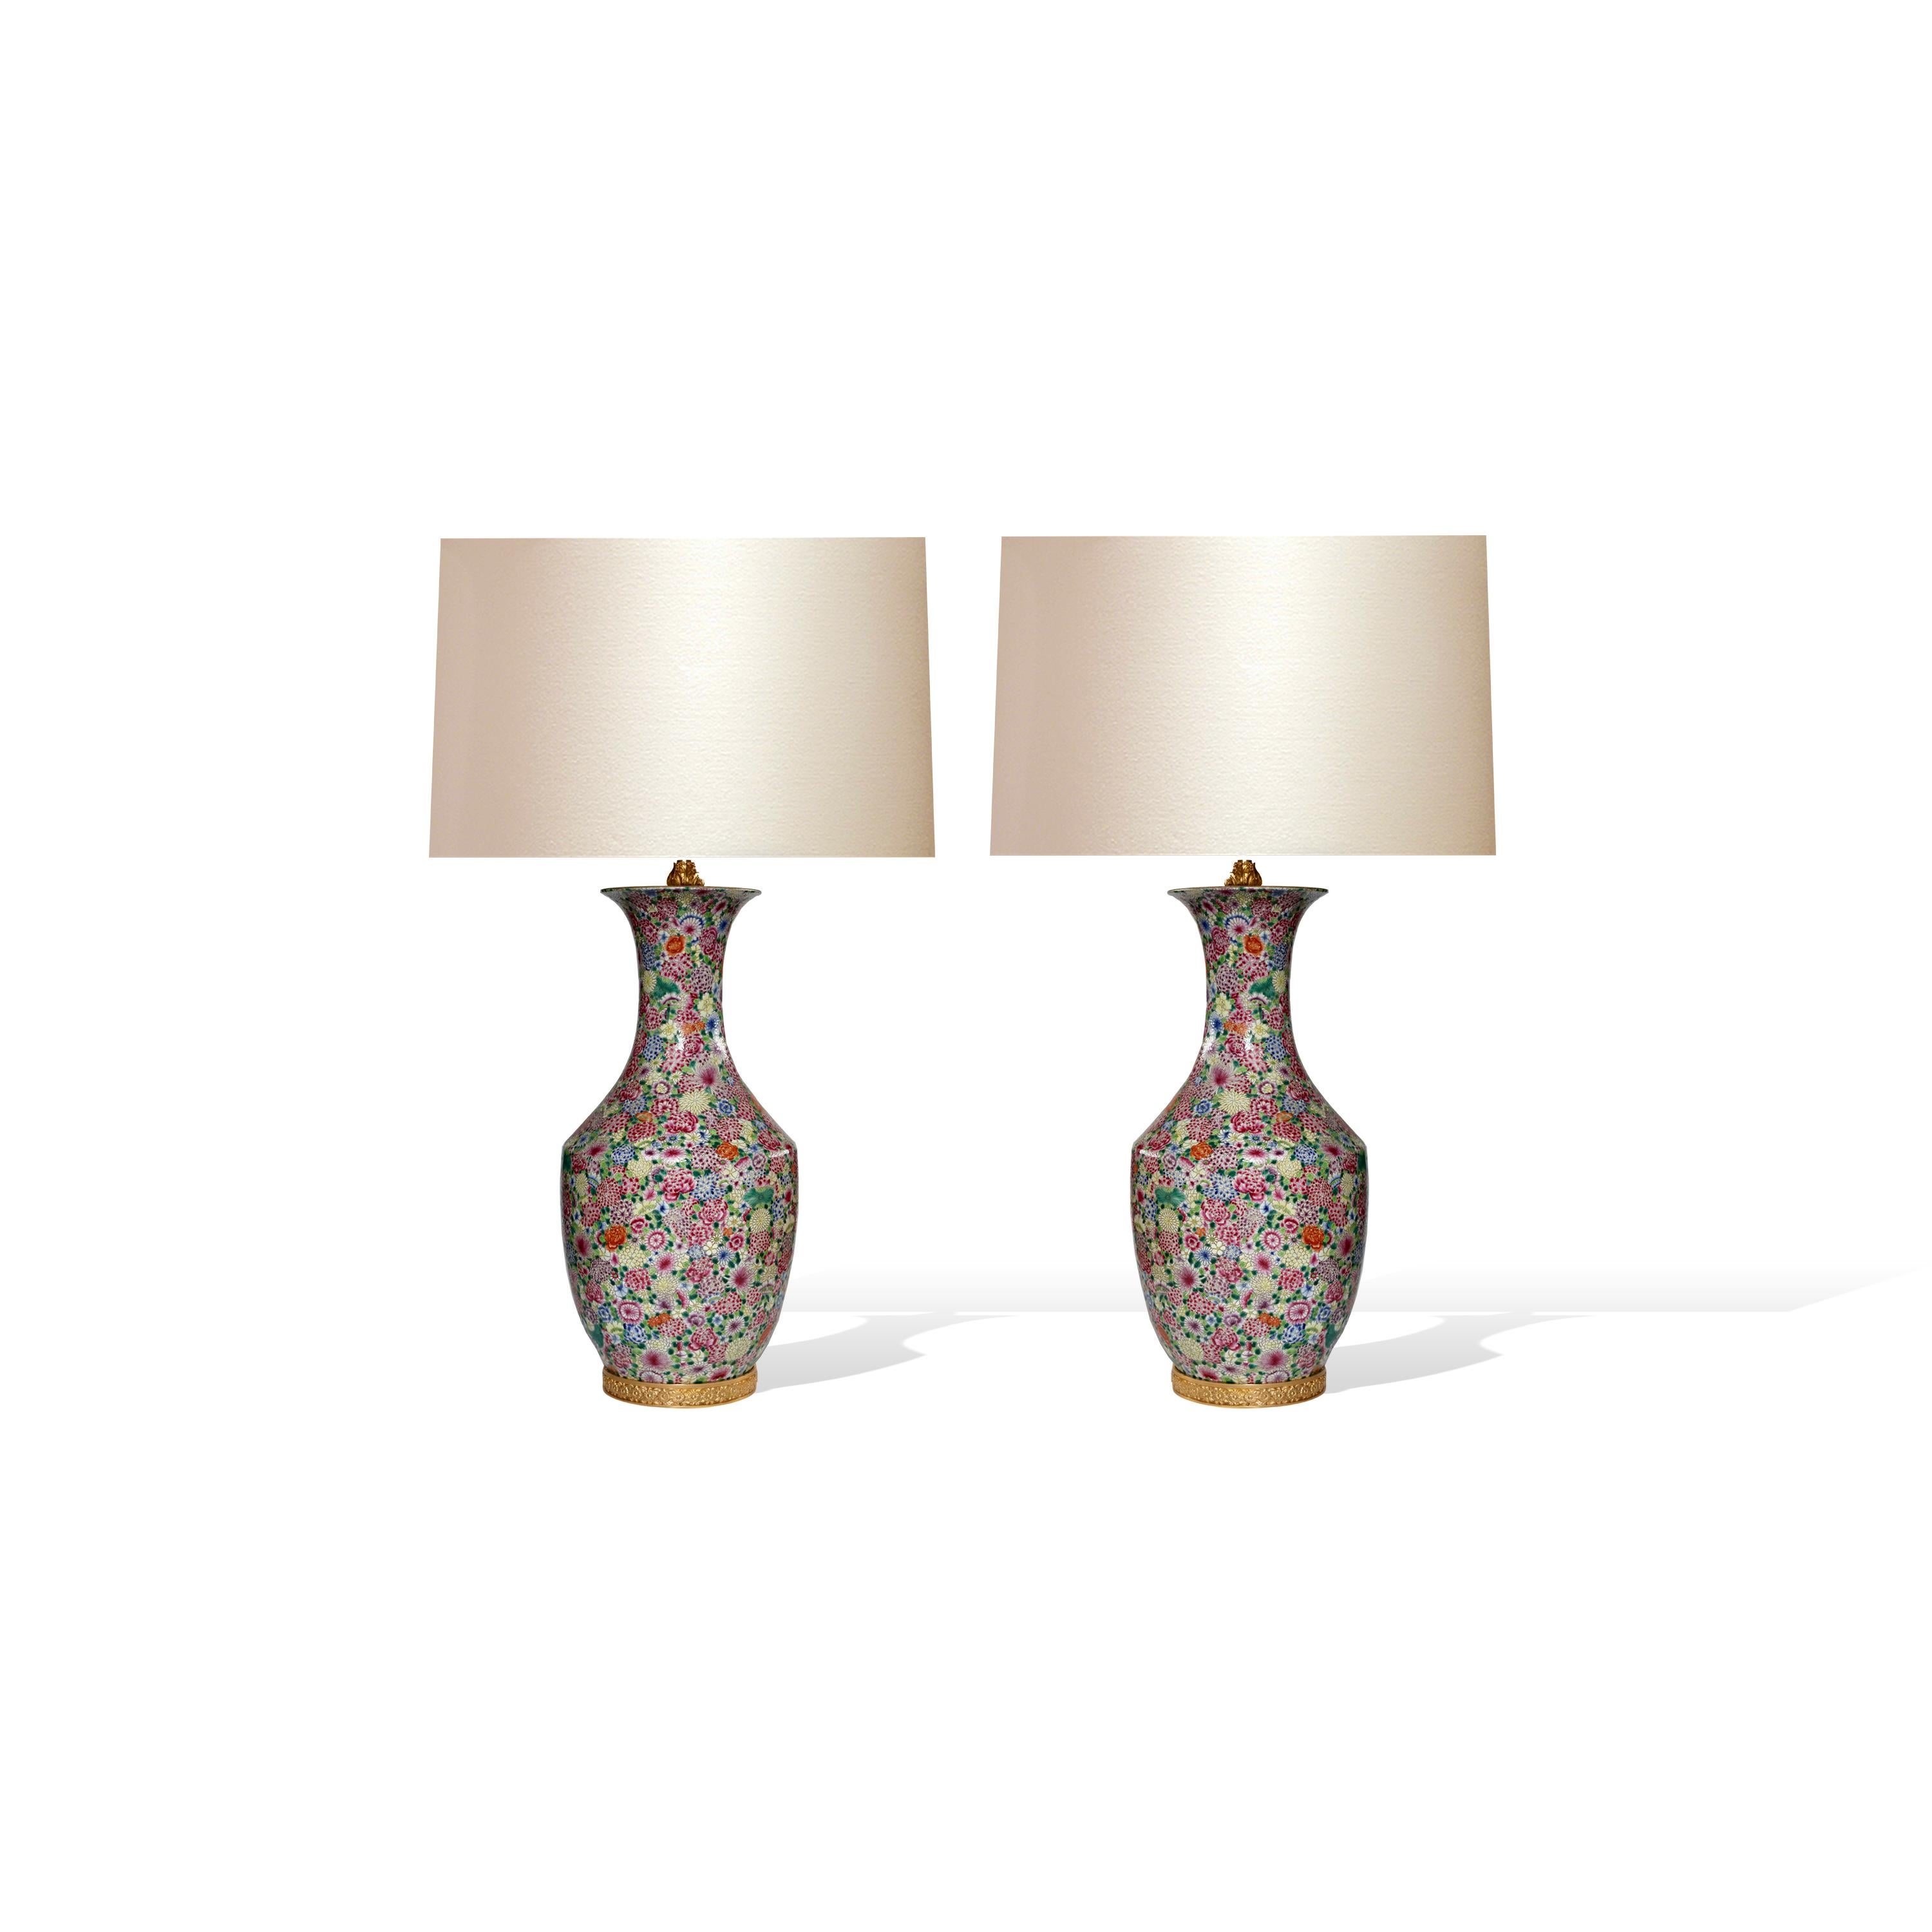 Pair of finely painted famille rose porcelain lamps with flower blossom decoration. 
To the top of the lamp body: 23”/H. 
(Lampshades not included).